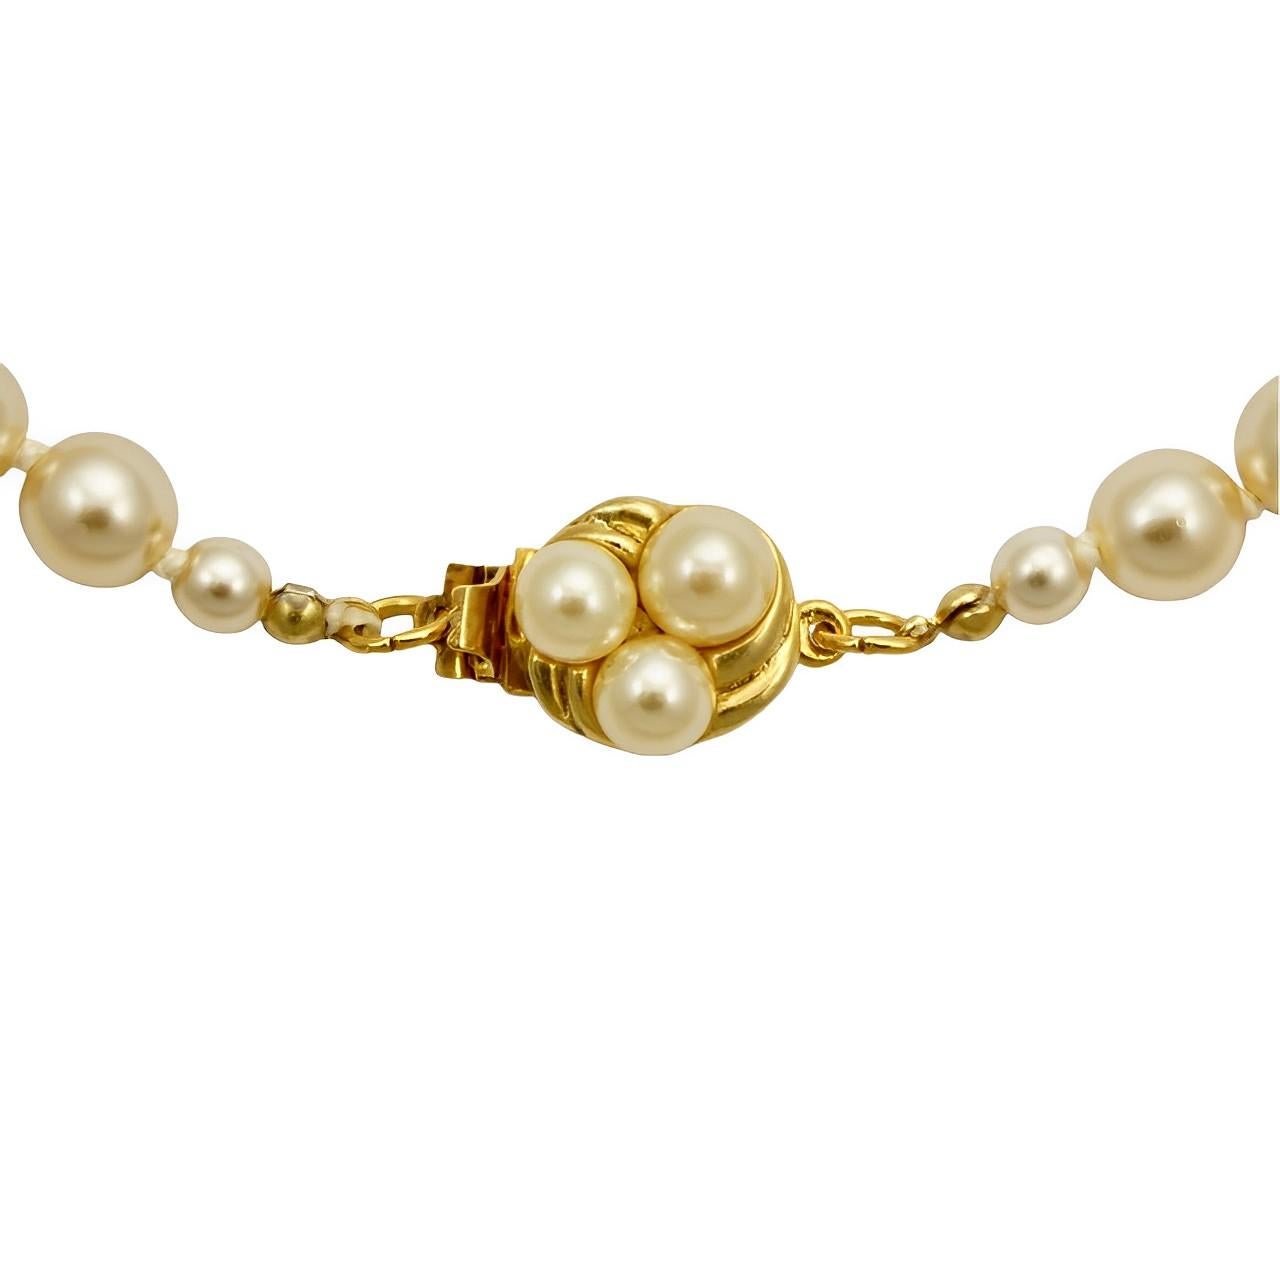 Beautiful long cream glass pearl necklace featuring a round gold plated ridged design clasp set with three pearls. The lustrous pearls are knotted between each pearl. Measuring length 65 cm / 25.6 inches. The pearls are 8 mm / .3 inch. The necklace